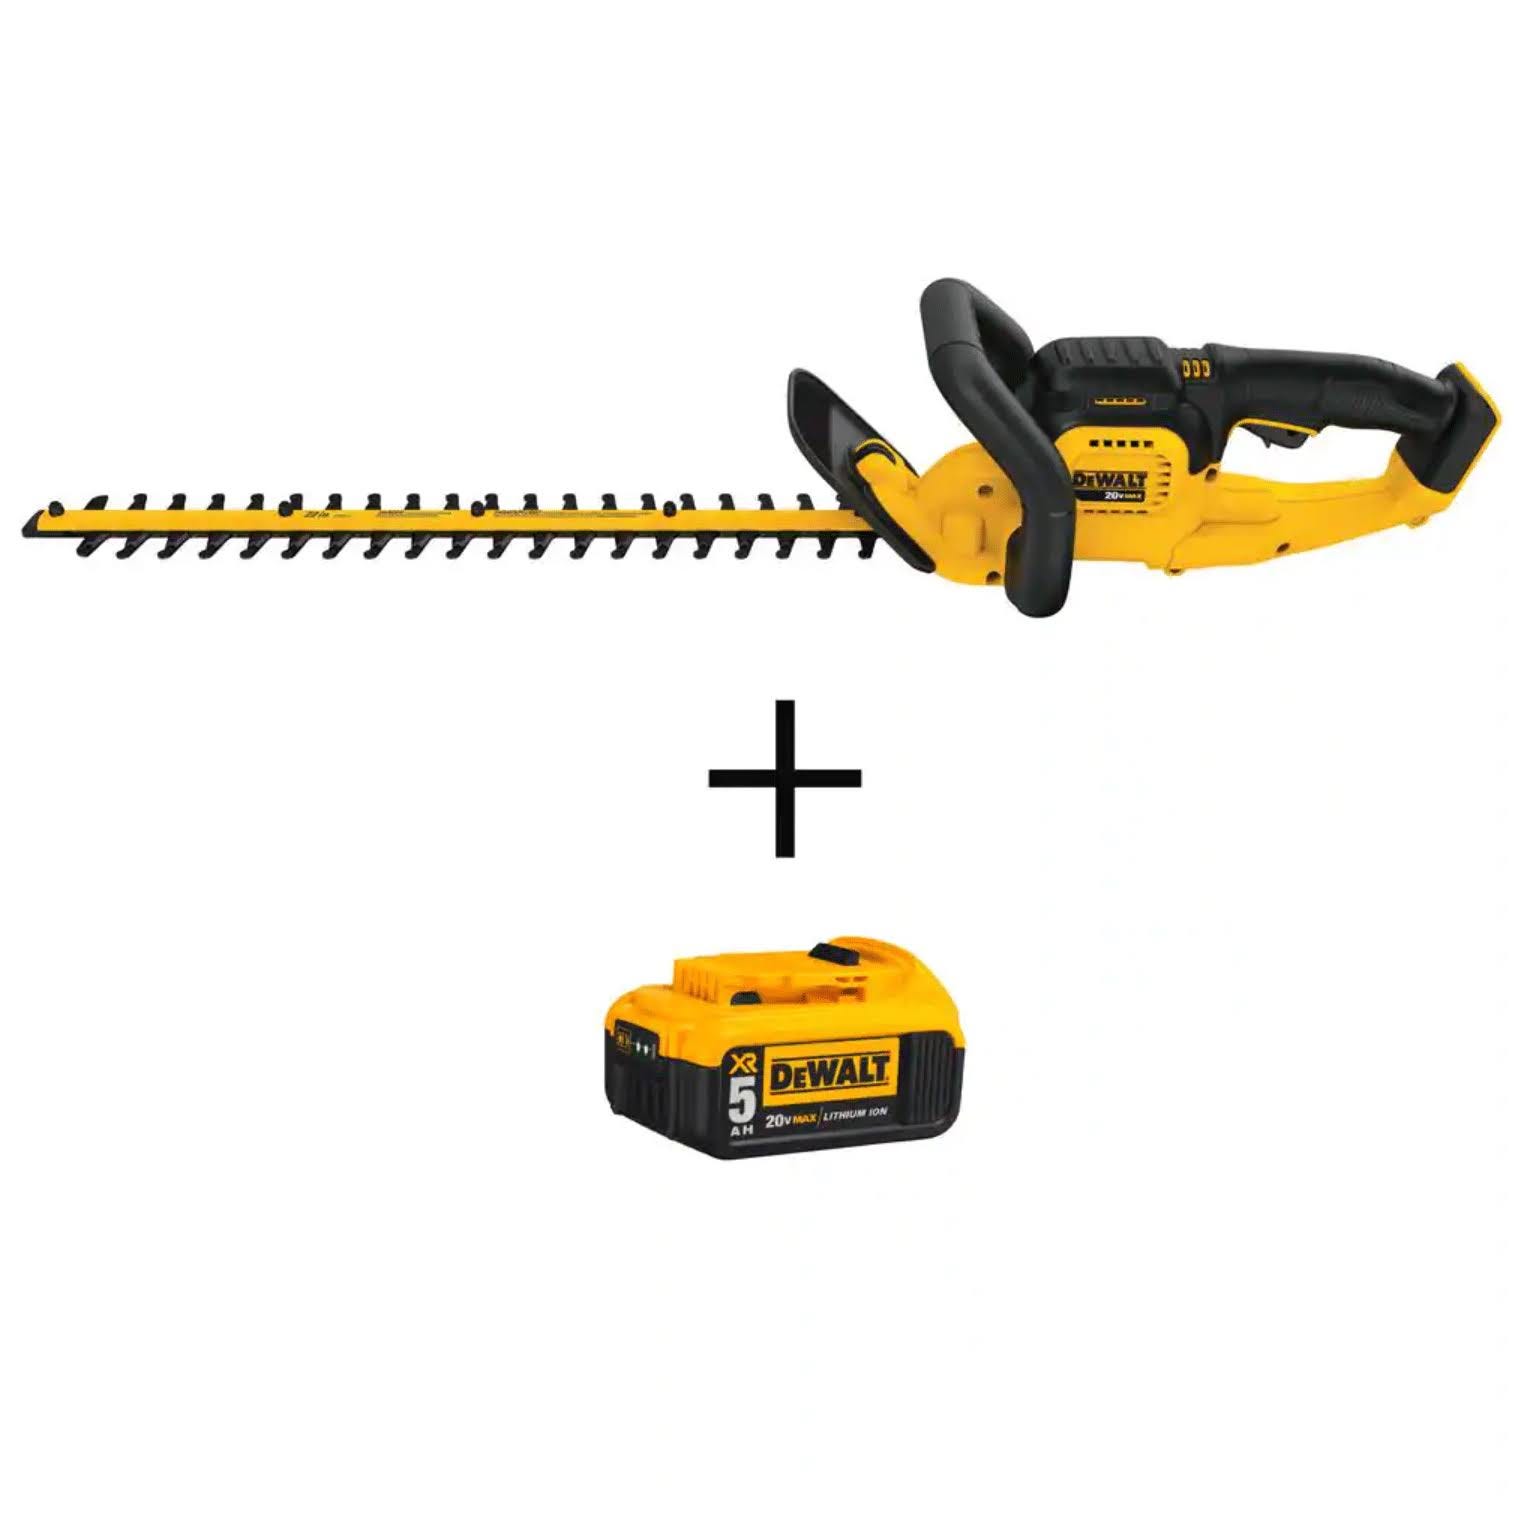 Dewalt 20V MAX Cordless Hedge Trimmer with 5Ah Lithium-Ion Battery: Advanced Power and Double-Sided Blades for Efficient Trimming | Image